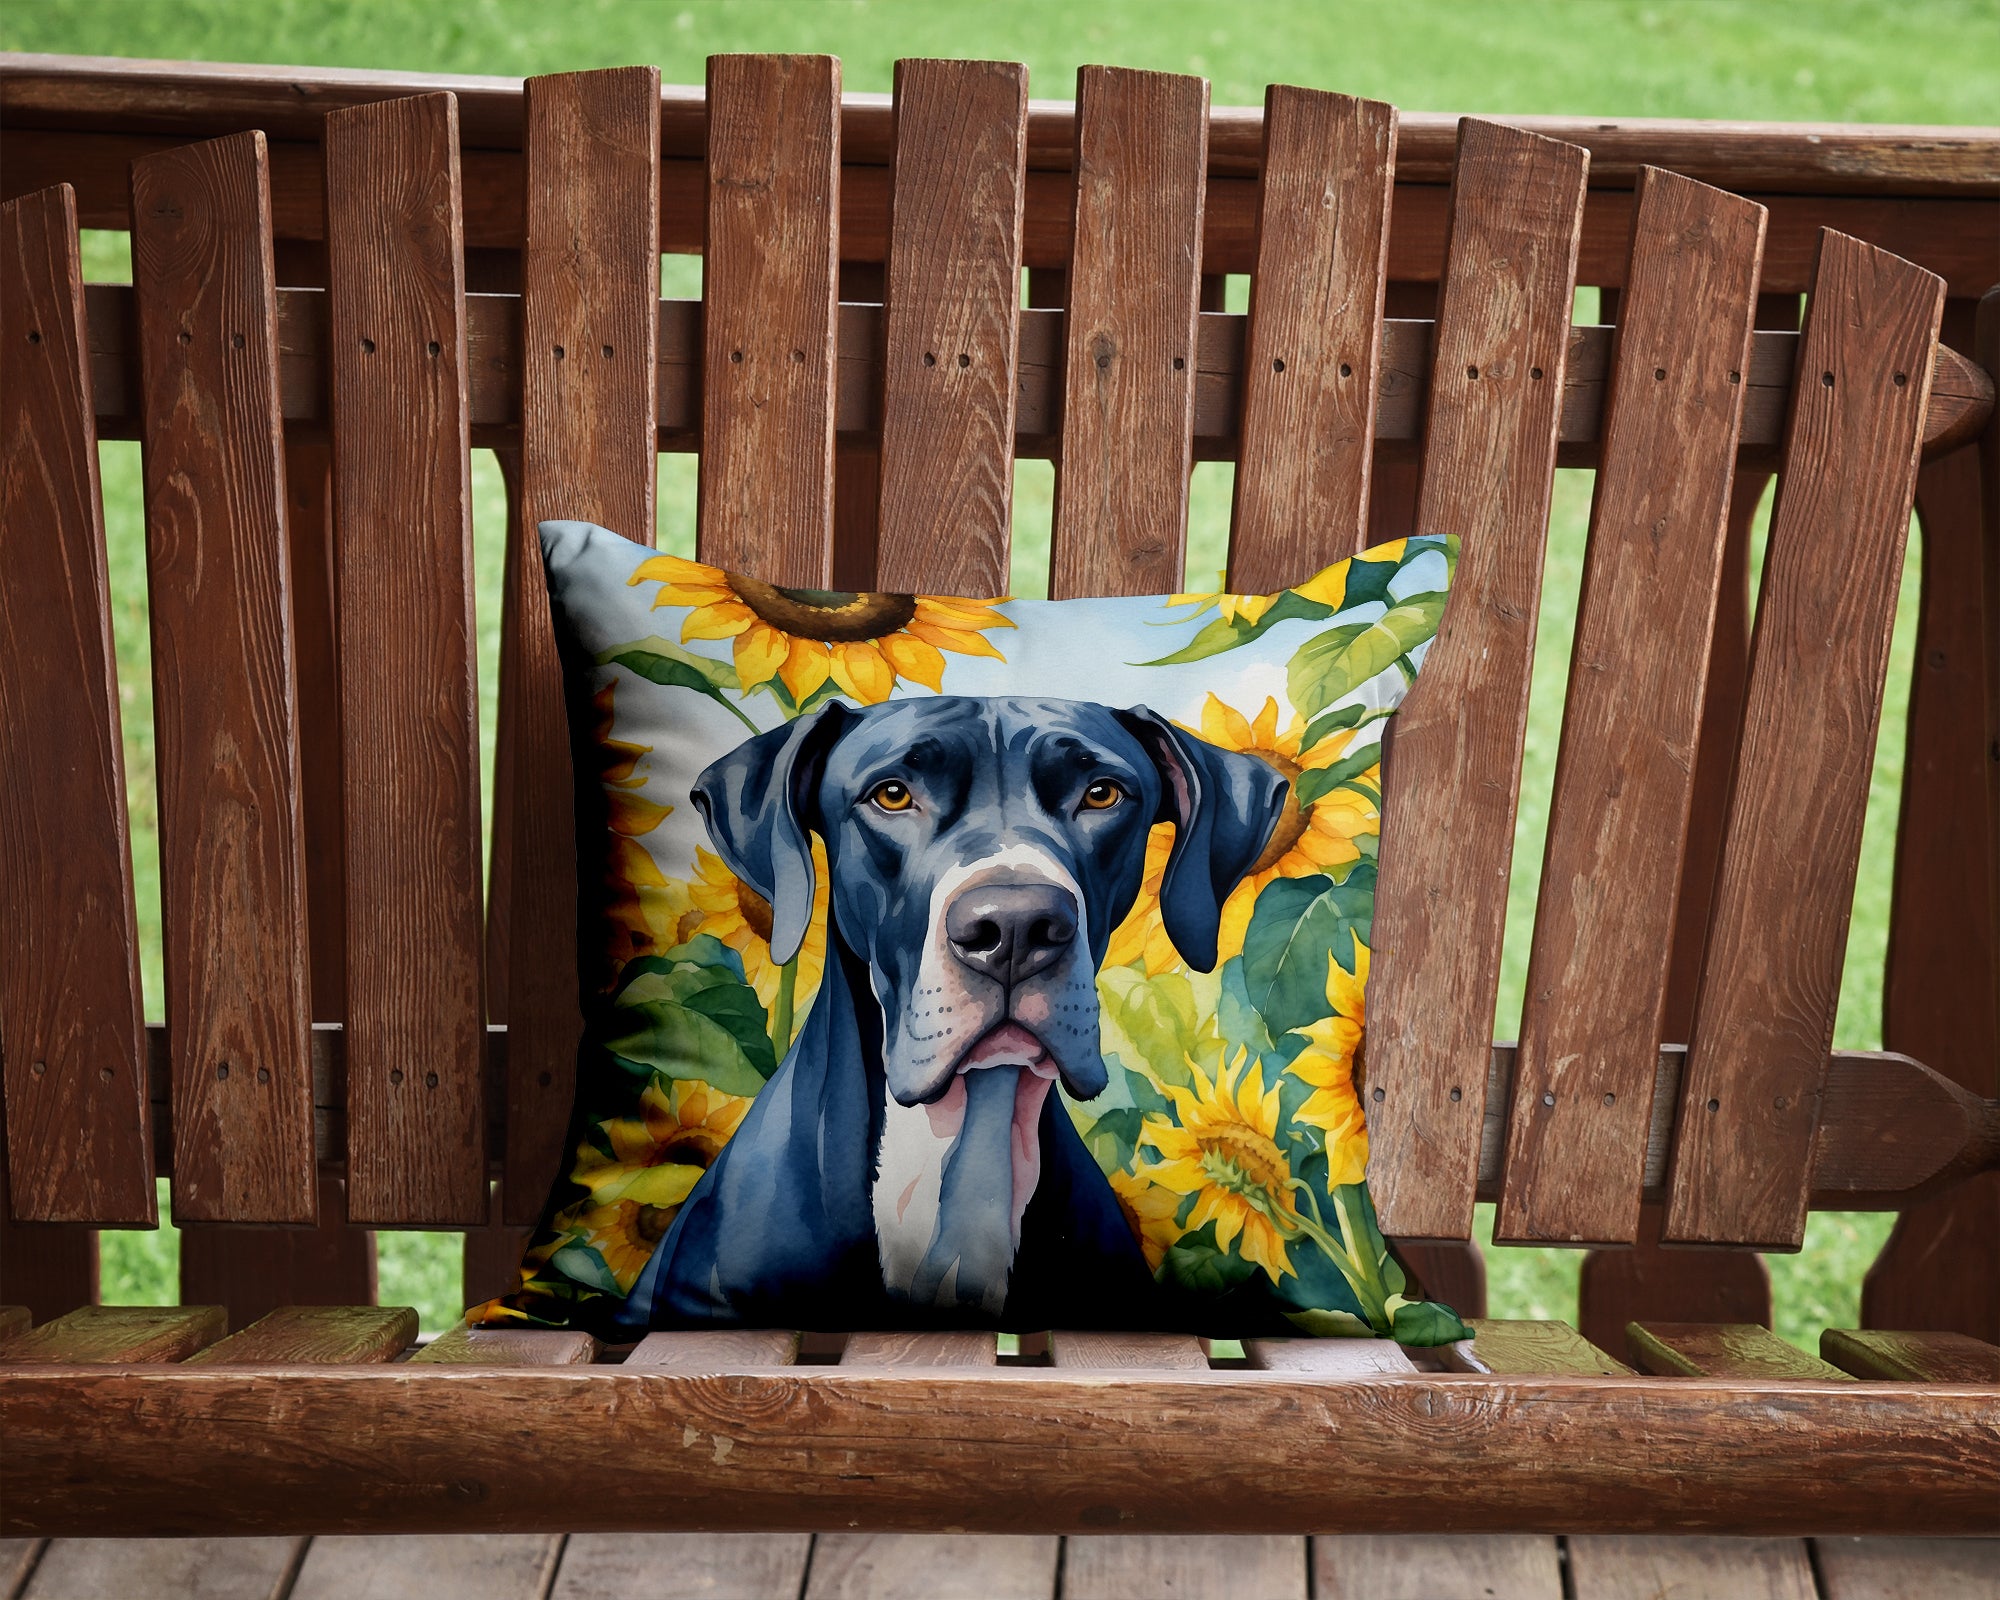 Buy this Great Dane in Sunflowers Throw Pillow